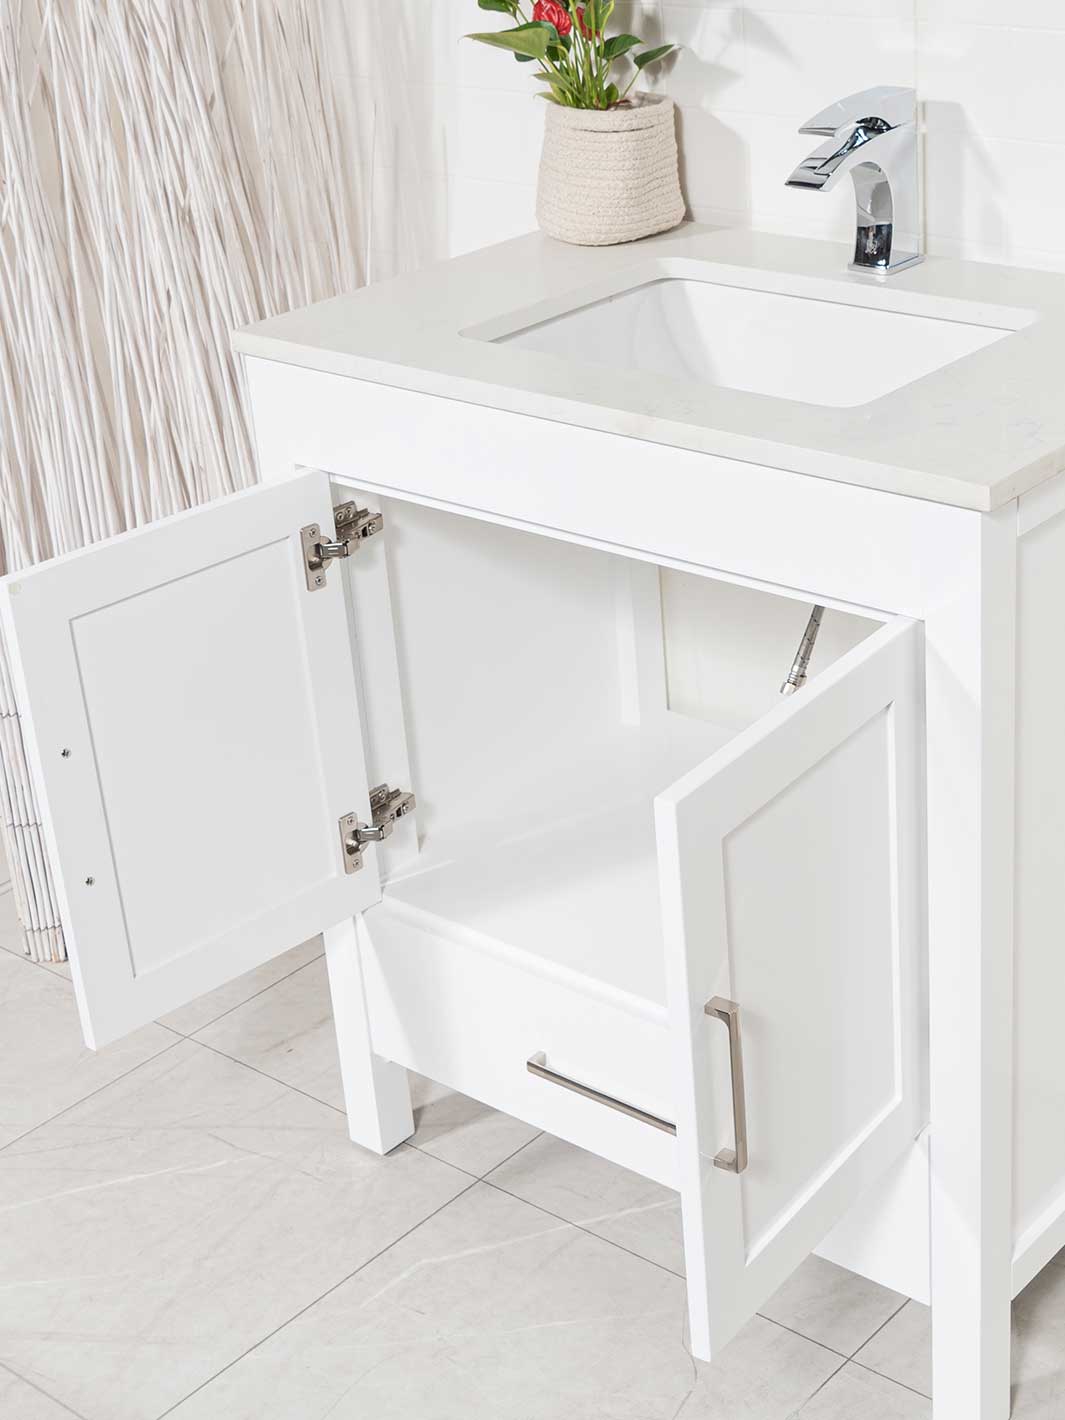 32 inch white bathroom vanity with cupboard under sink and bottom drawer 